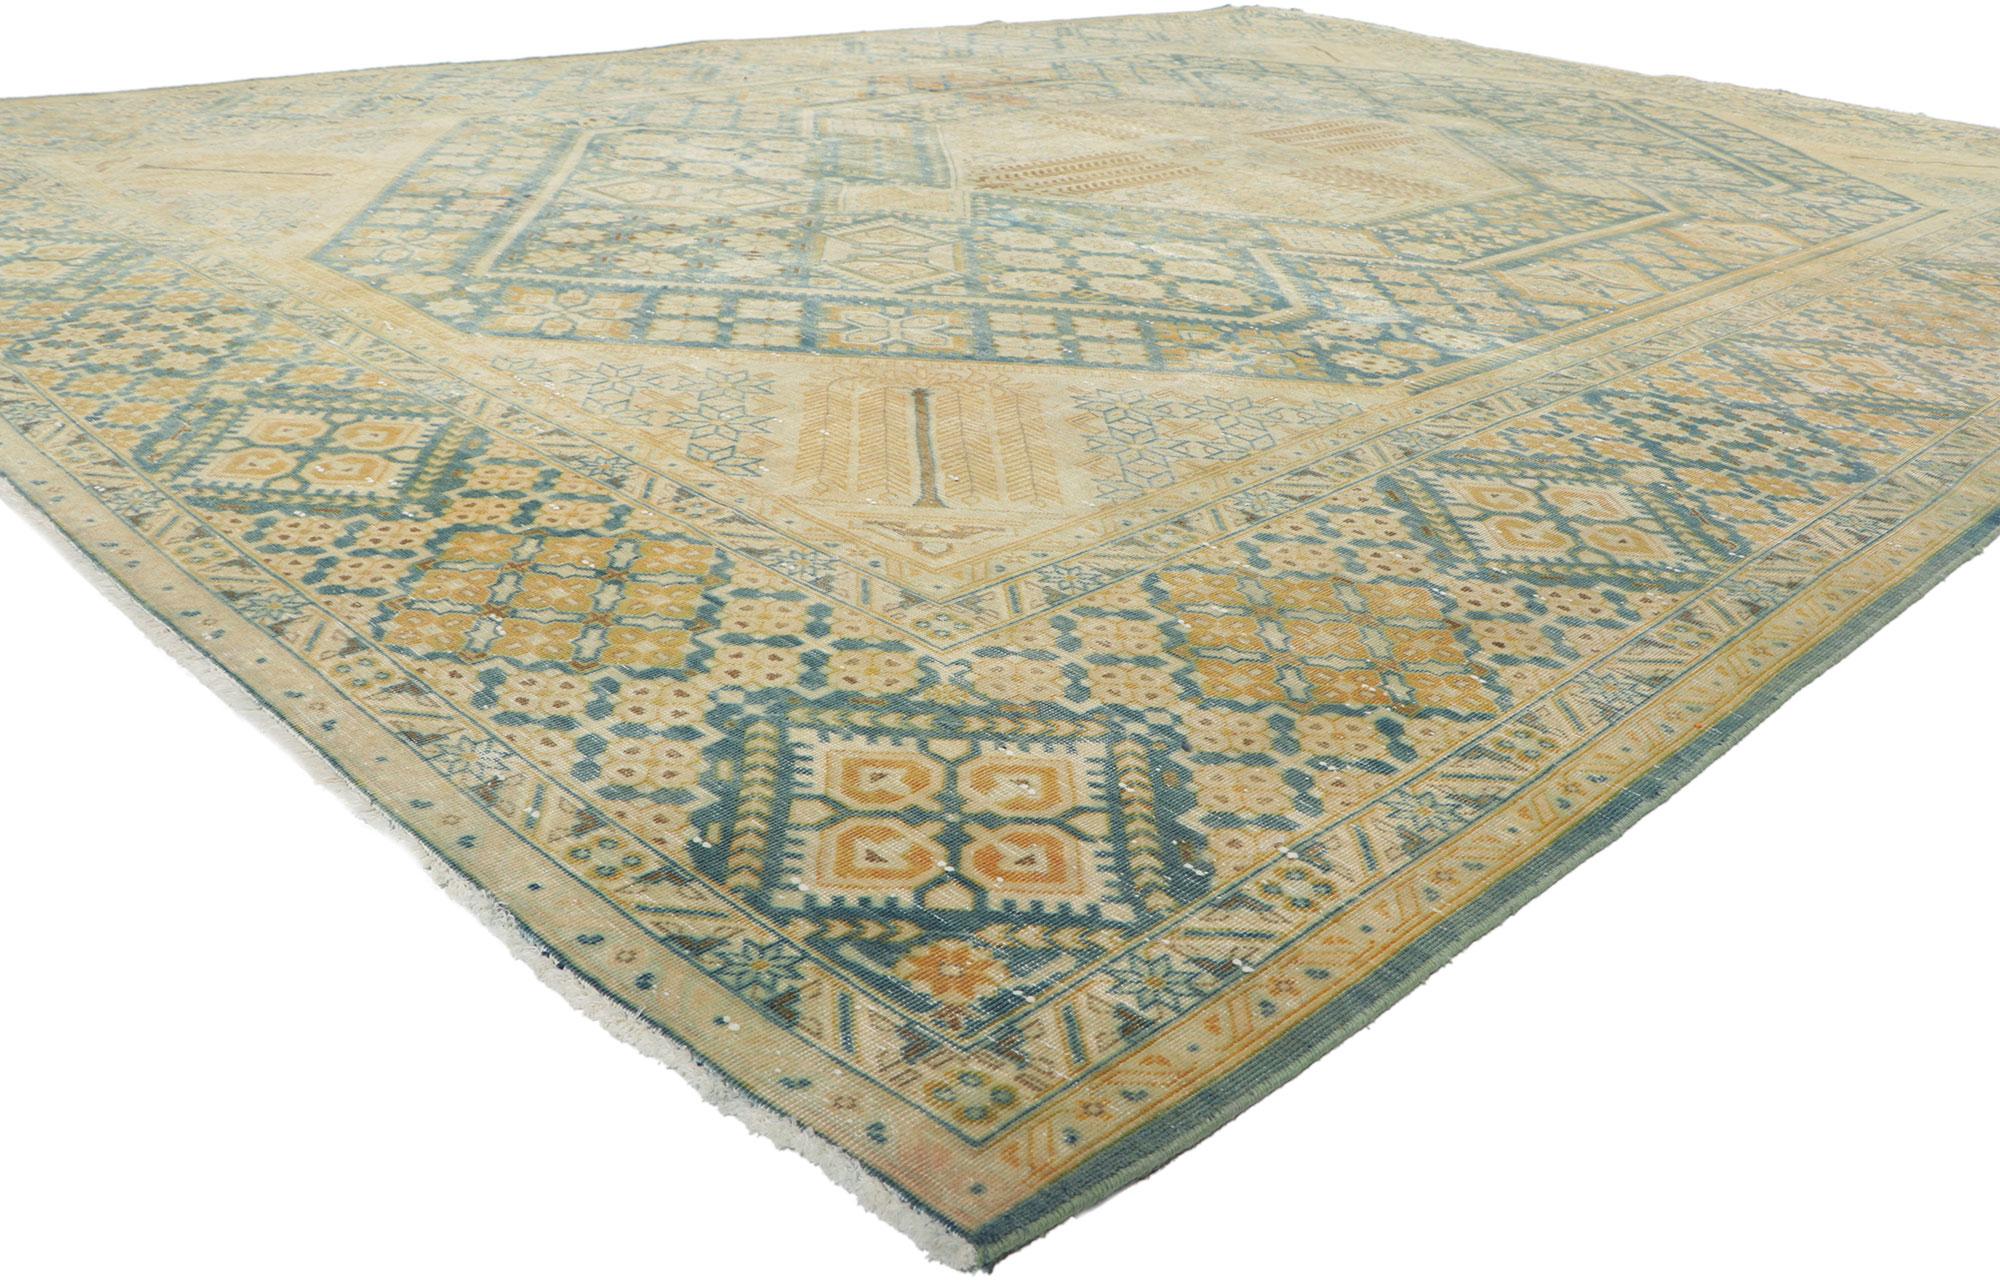 60997 Vintage Persian Tabriz rug, 10.04 x 14.03.
Showcasing timeless style with incredible detail and texture, this hand knotted wool vintage Persian Tabriz rug is a captivating vision of woven beauty. The geometric design and soft colorway woven